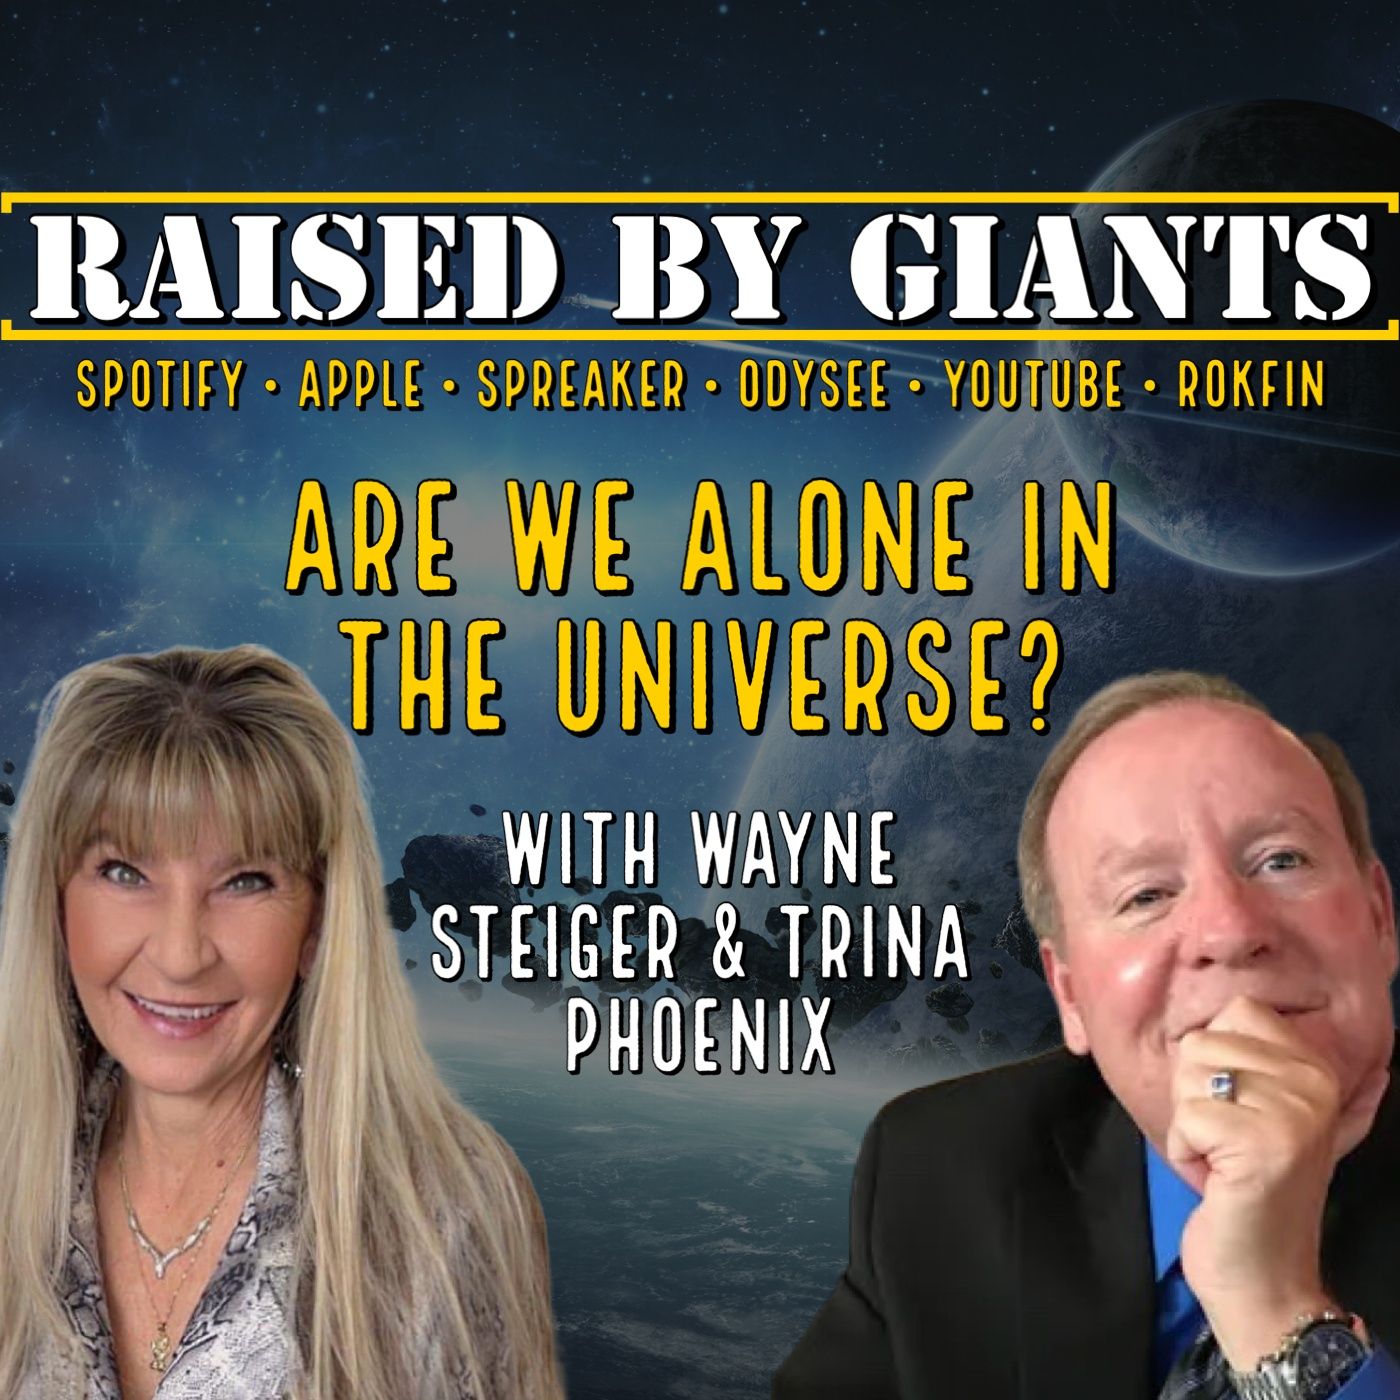 Are We Alone In The Universe? with Wayne Steiger & Trina Phoenix